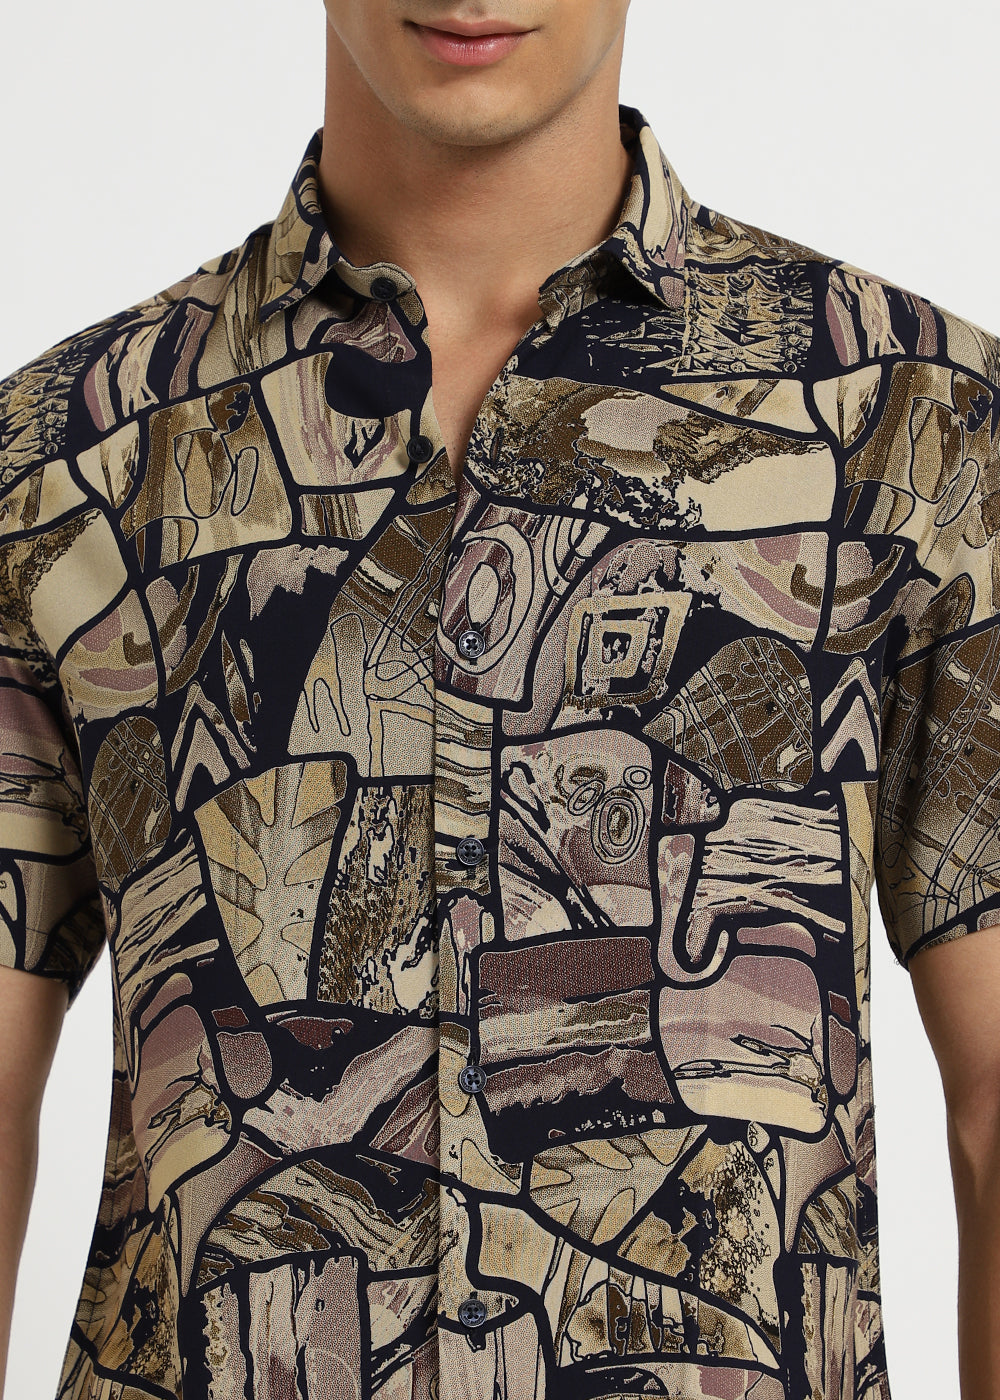 Abstract Mosaic Feather shirt